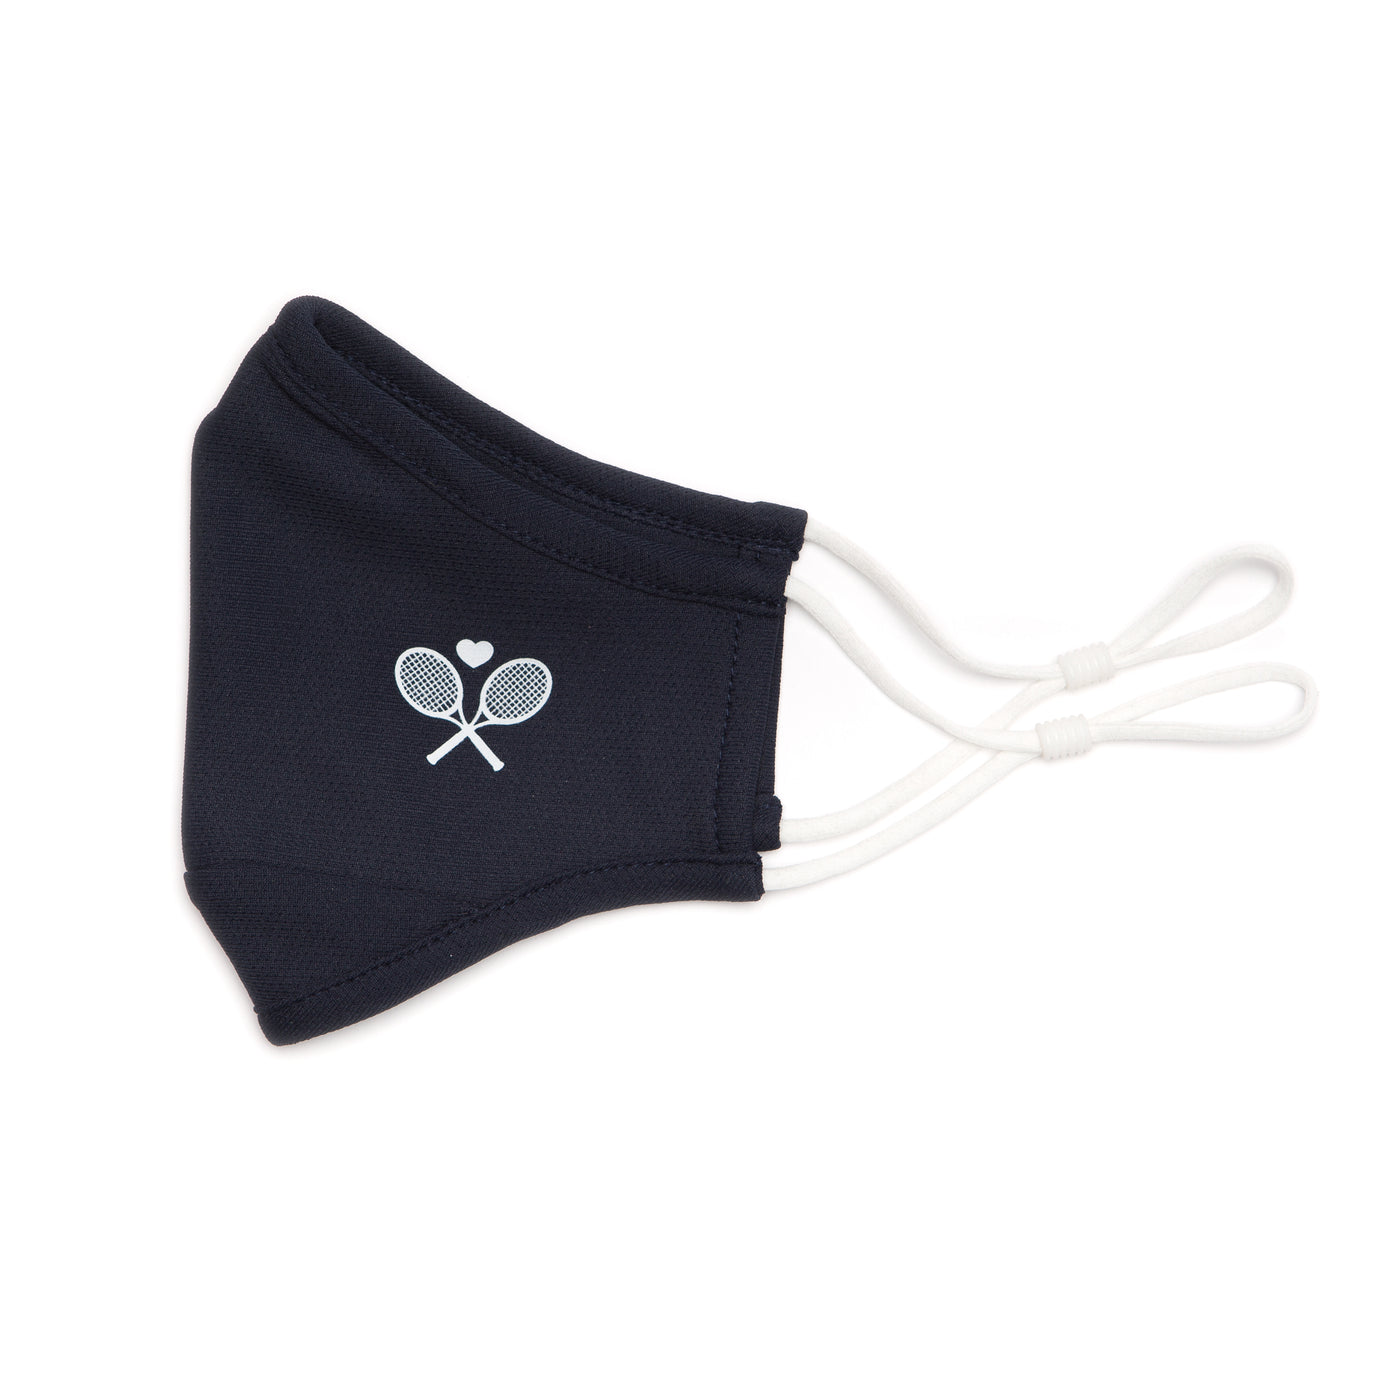 navy face mask with white crossed racquets printed on one side